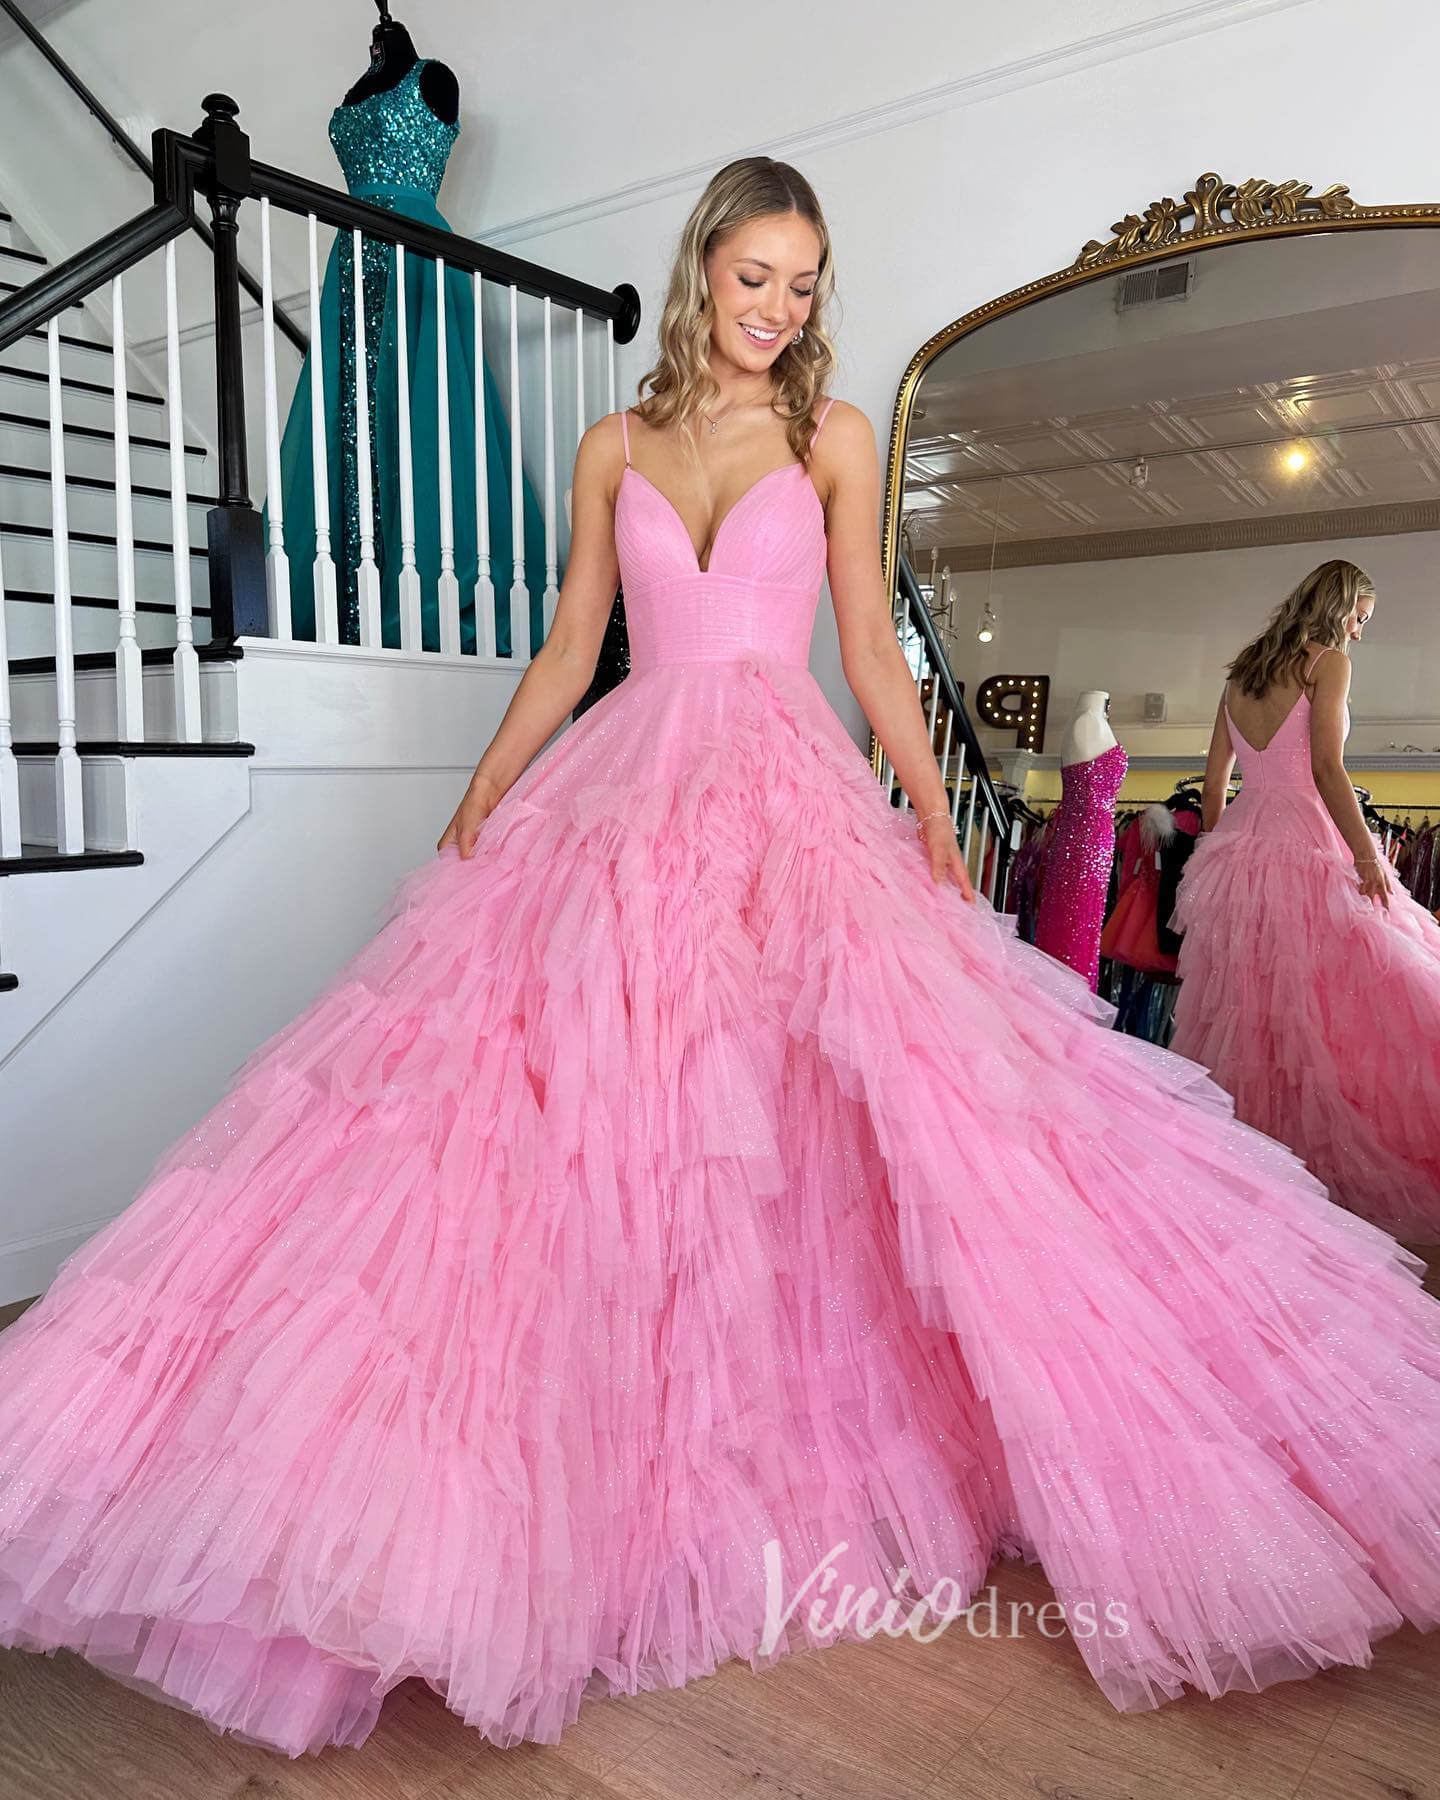 Bright Pink Ruffle Prom Dresses Tiered Ball Gown with Slit FD3509-prom dresses-Viniodress-Viniodress